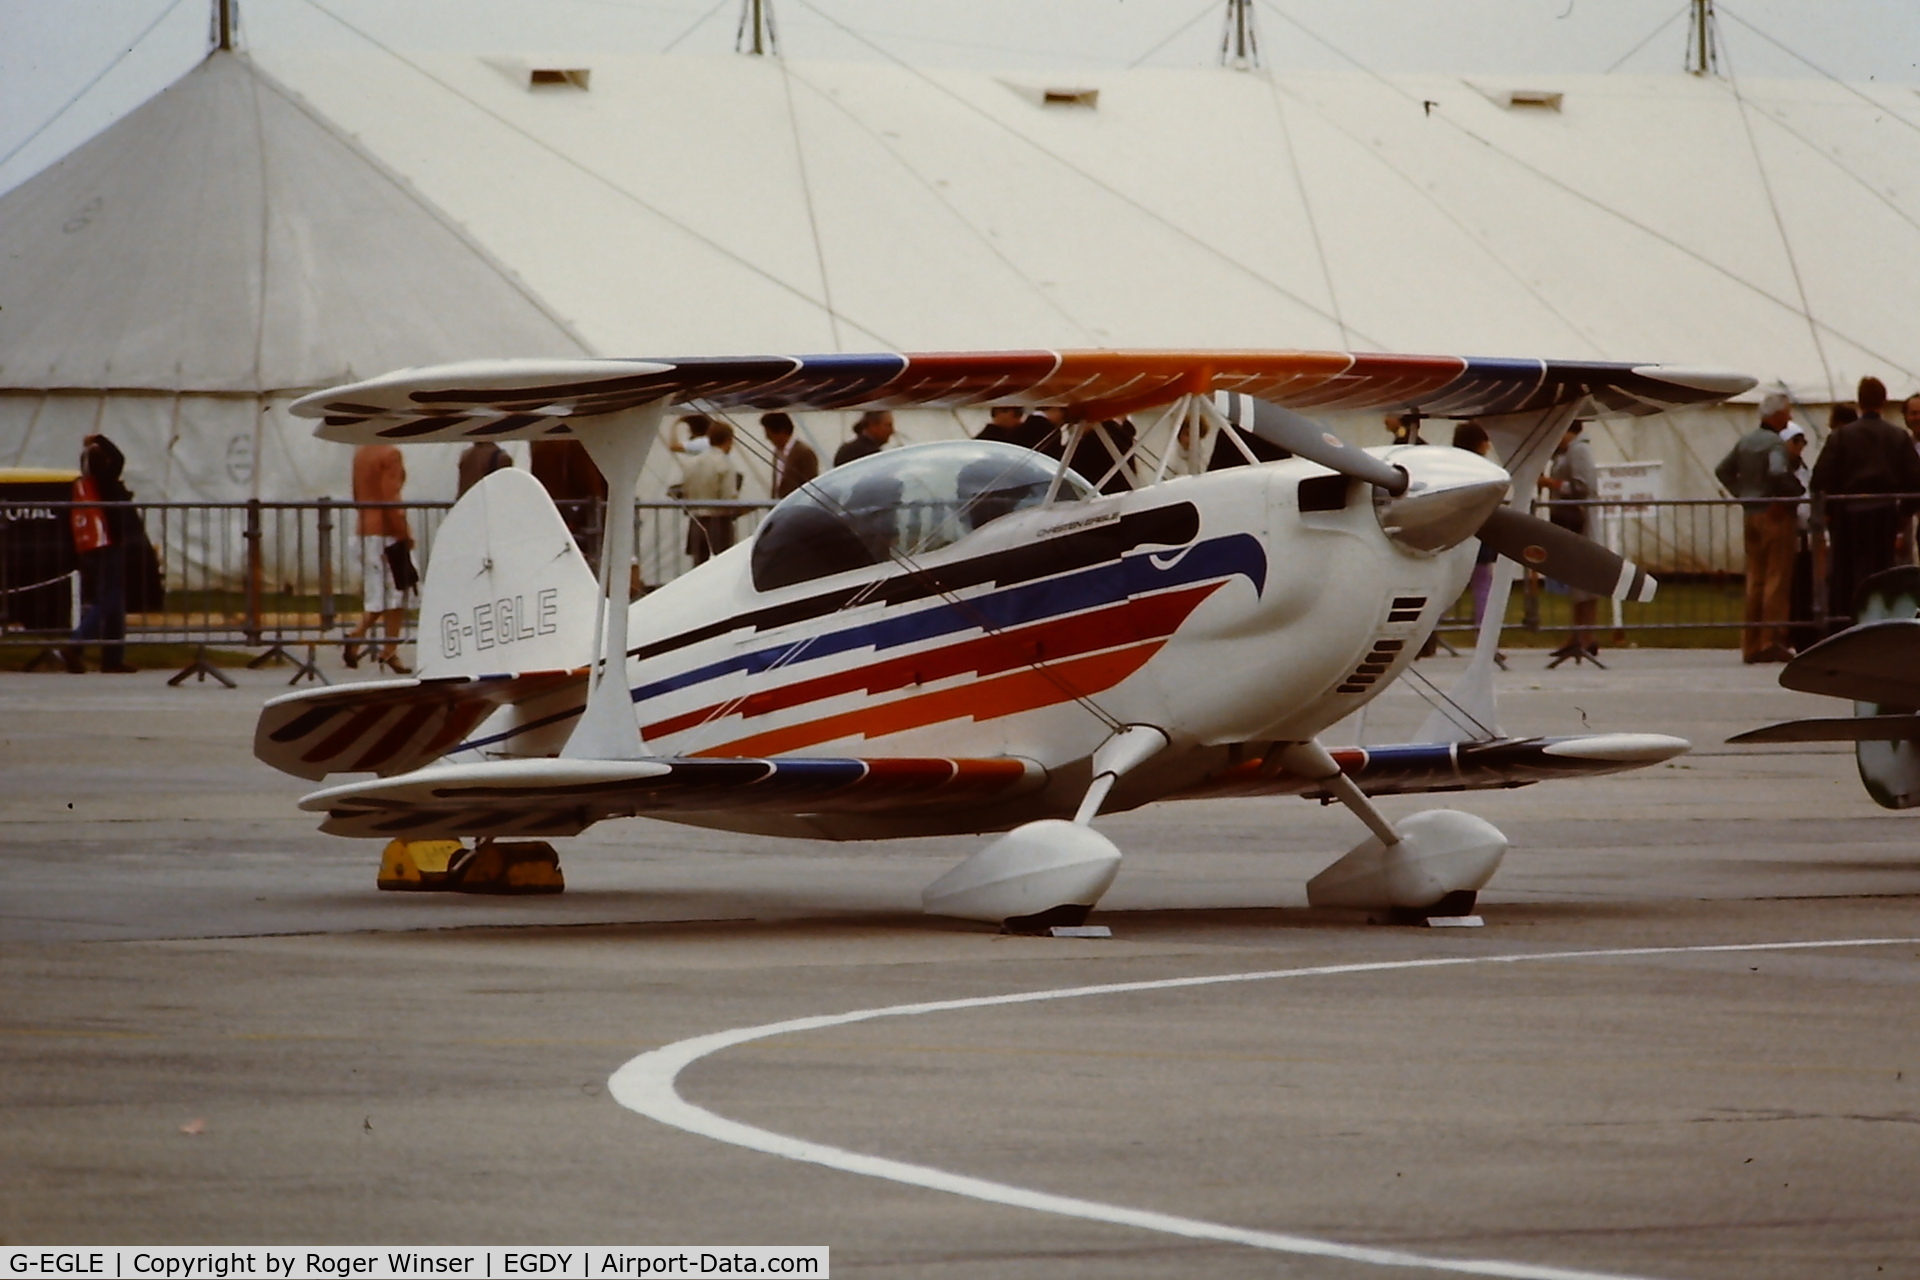 G-EGLE, 1980 Christen Eagle II C/N F0053, At a RNAS Yeovilton Naval Air Day. Circa mid-1980's, year to be confirmed